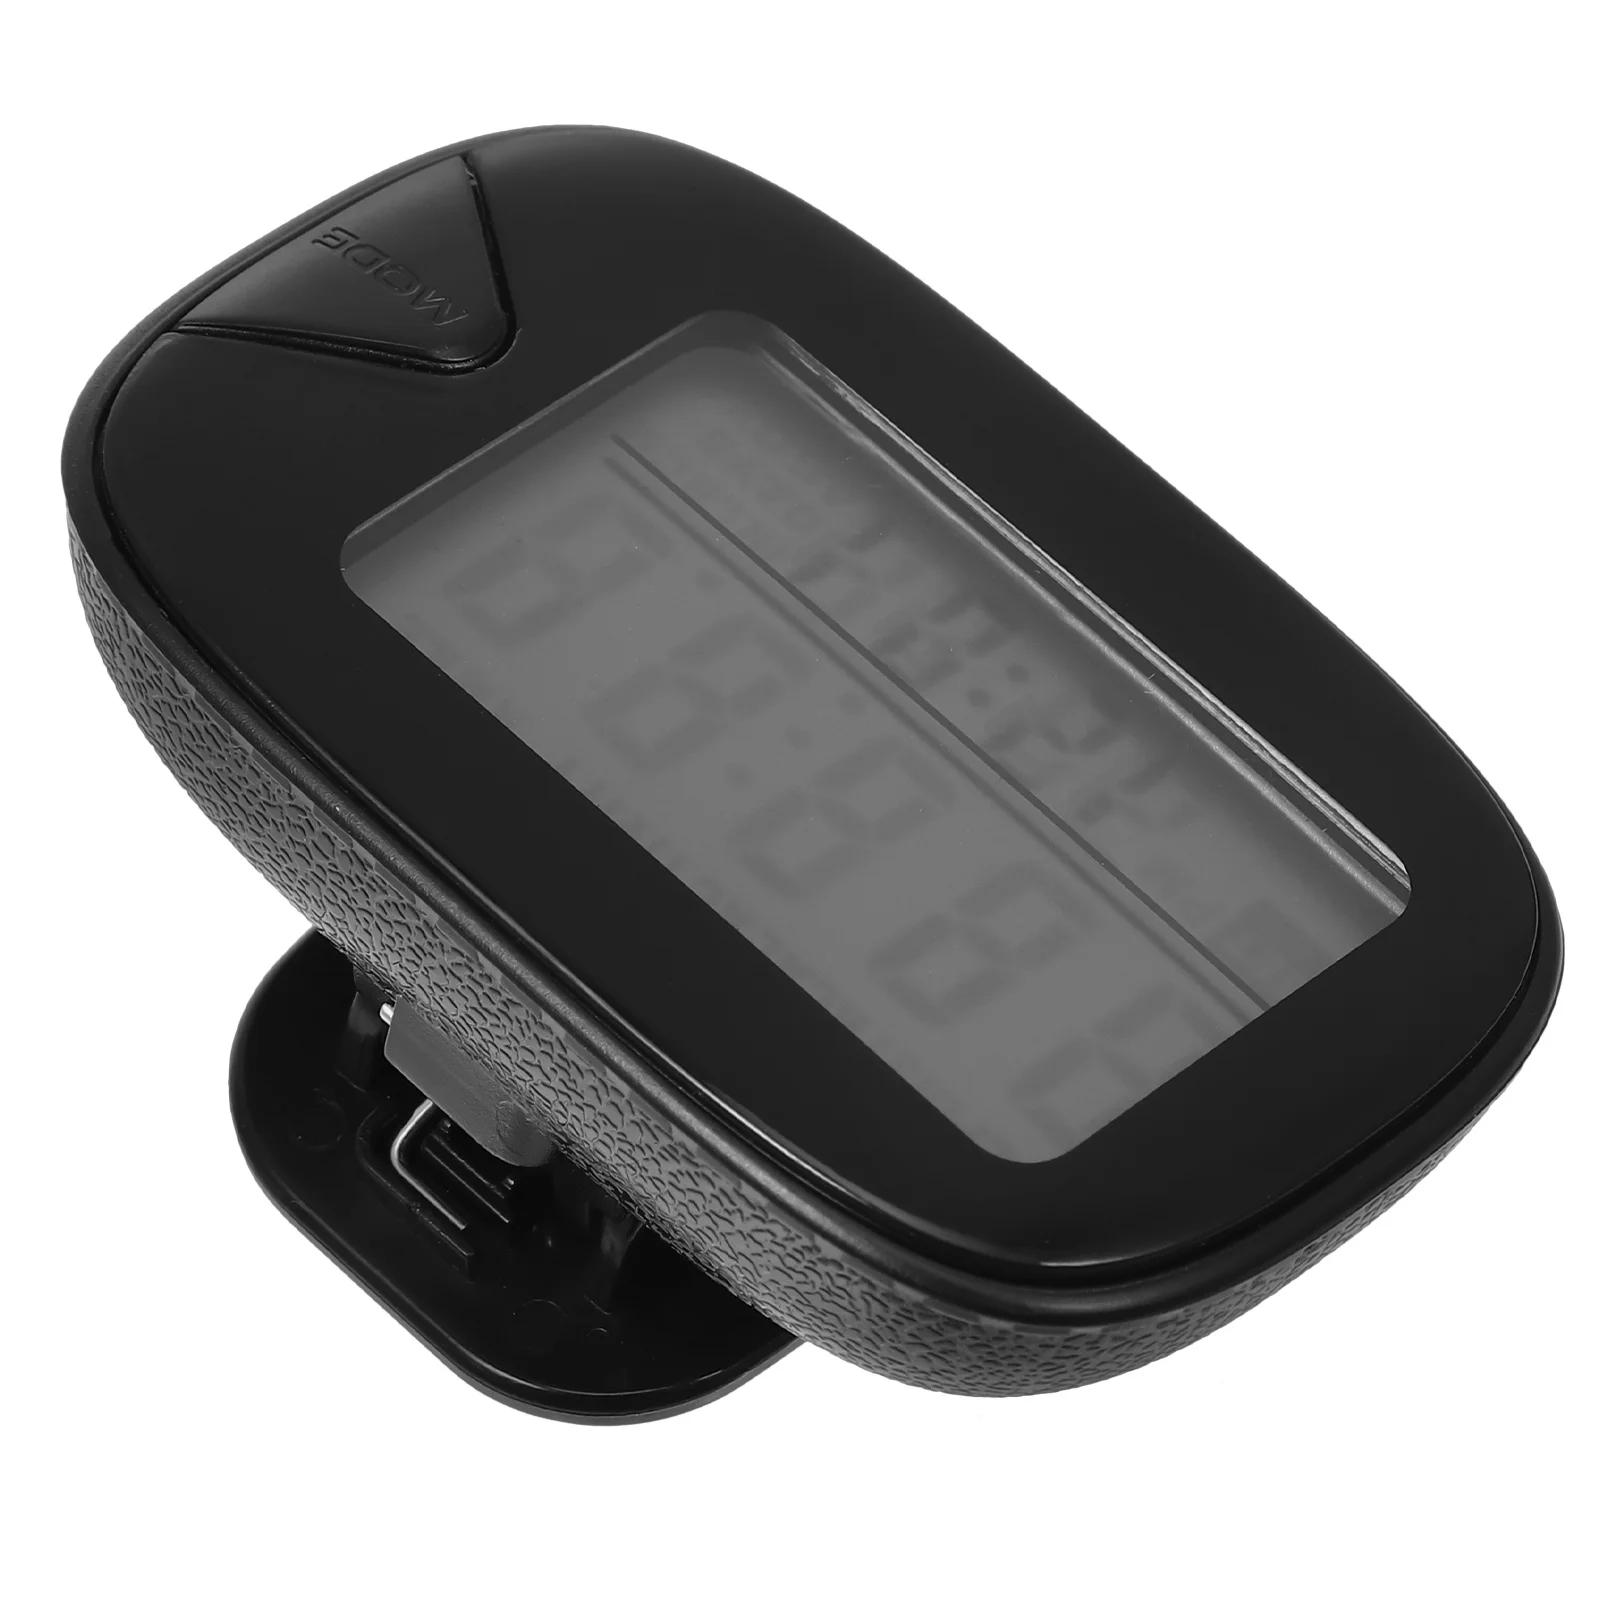 

Pedometer Step Counter Walking Exercise Sports Basic Pedometers Supplies Fitness Counters Walk Digital Foot Pocket Meter Watch